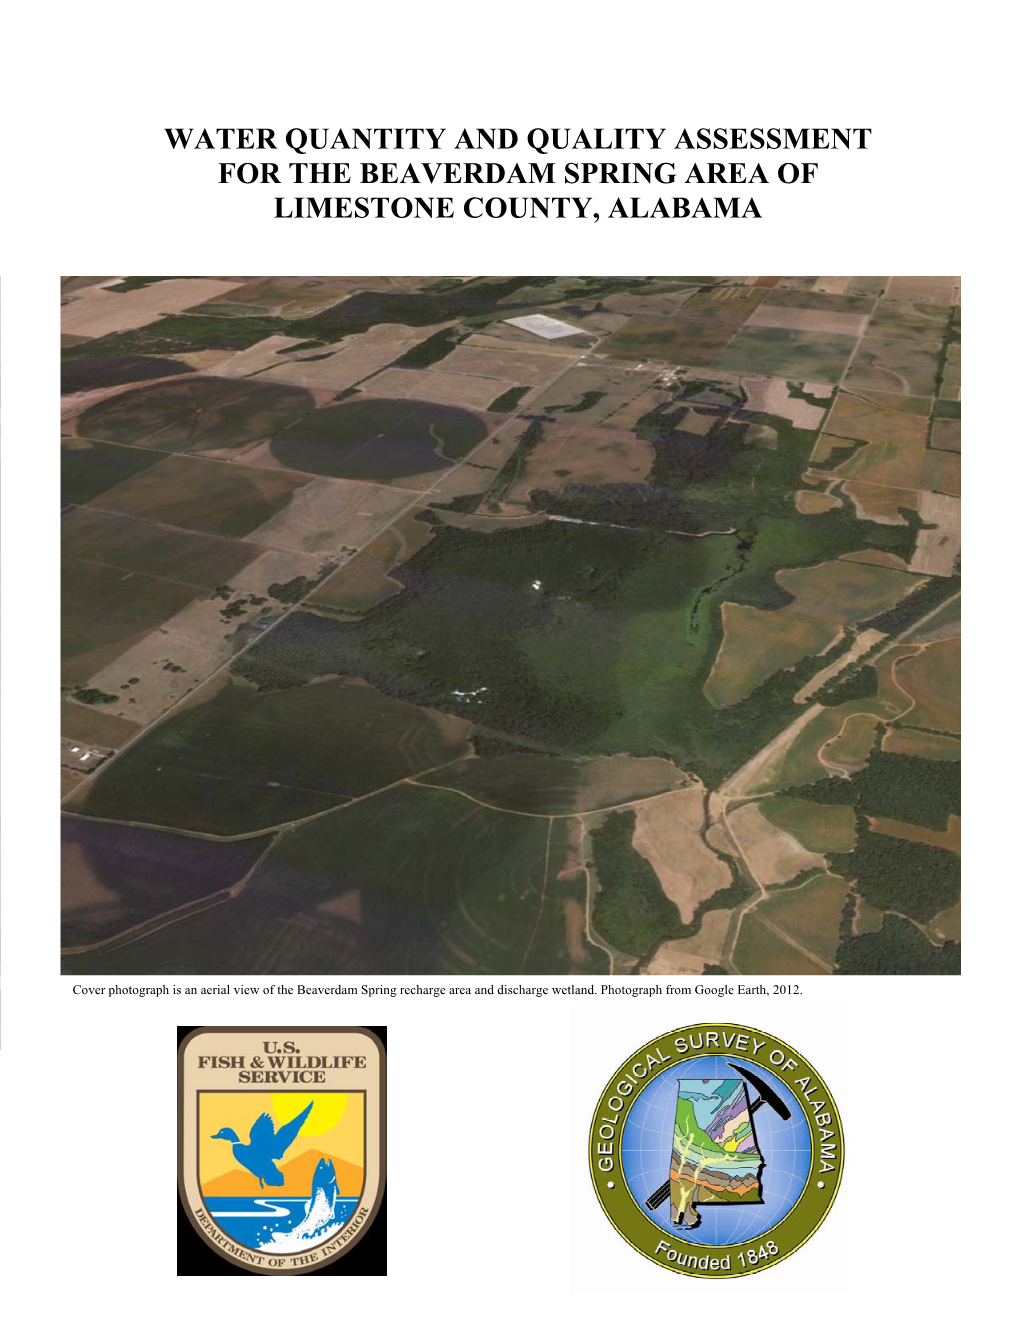 Water Quantity and Quality Assessment for the Beaverdam Spring Area of Limestone County, Alabama